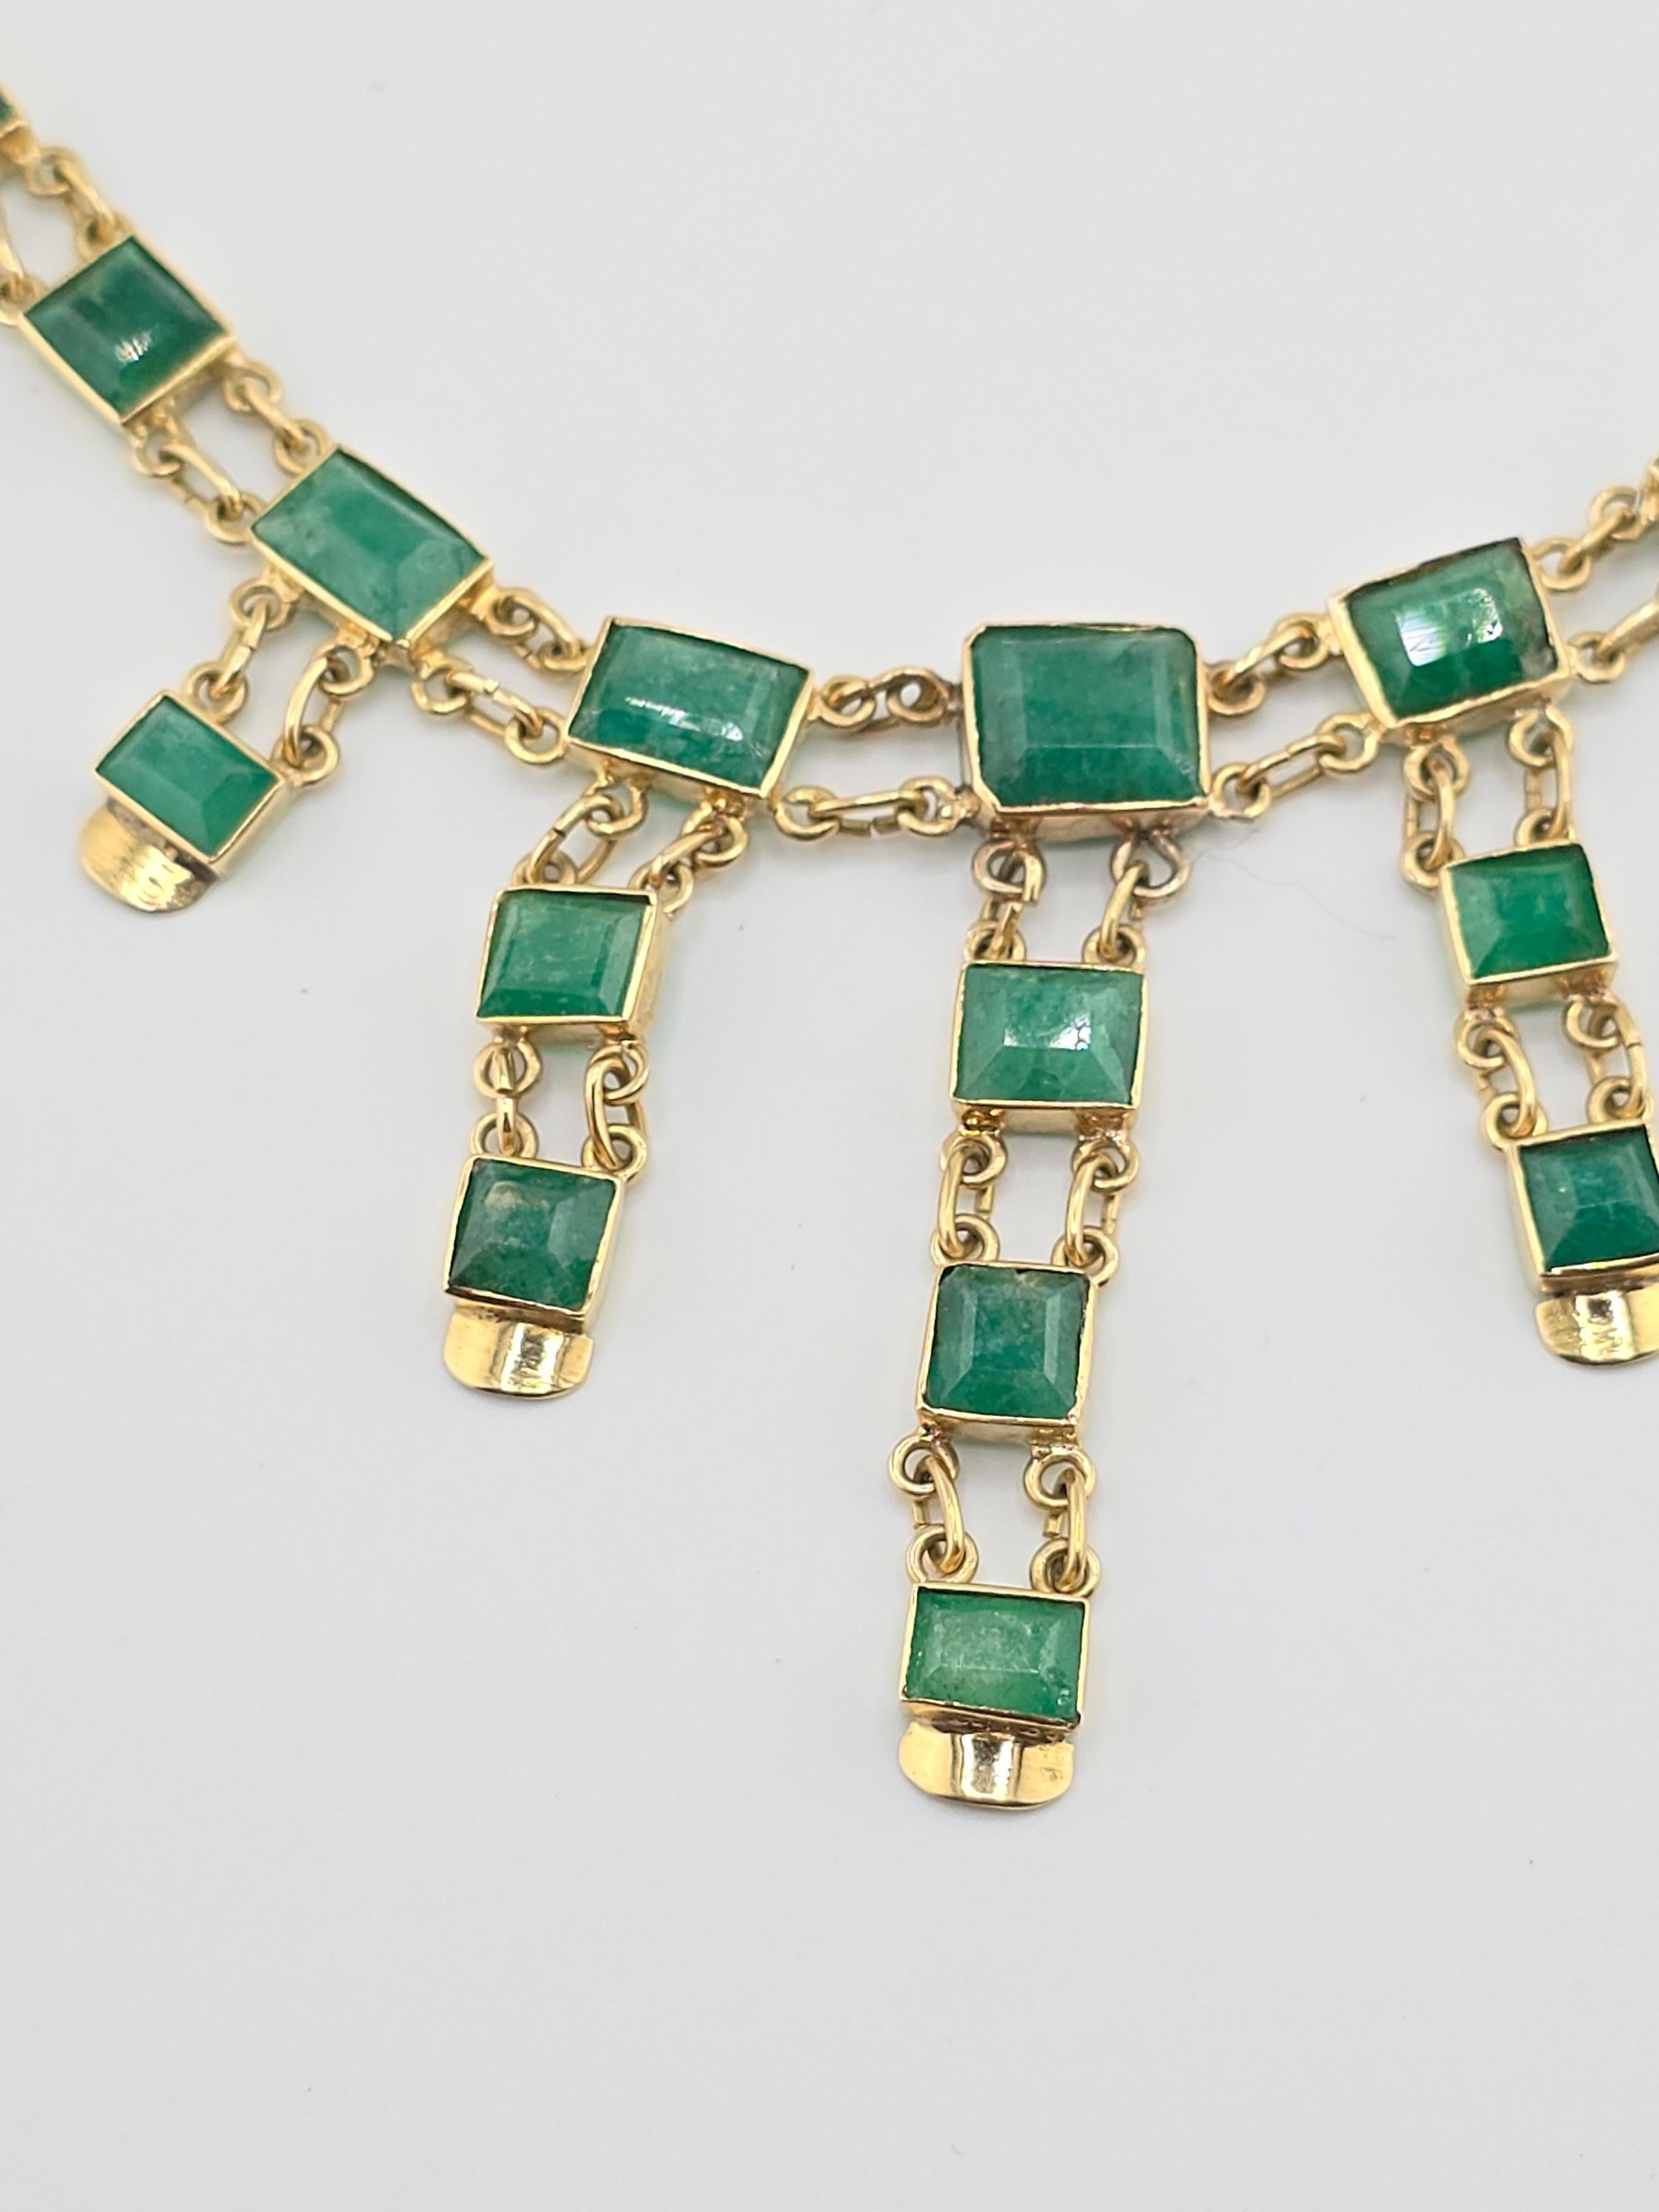 Majestic 14K Yellow Gold & Emerald Necklace 31.74 Grams For Sale 3